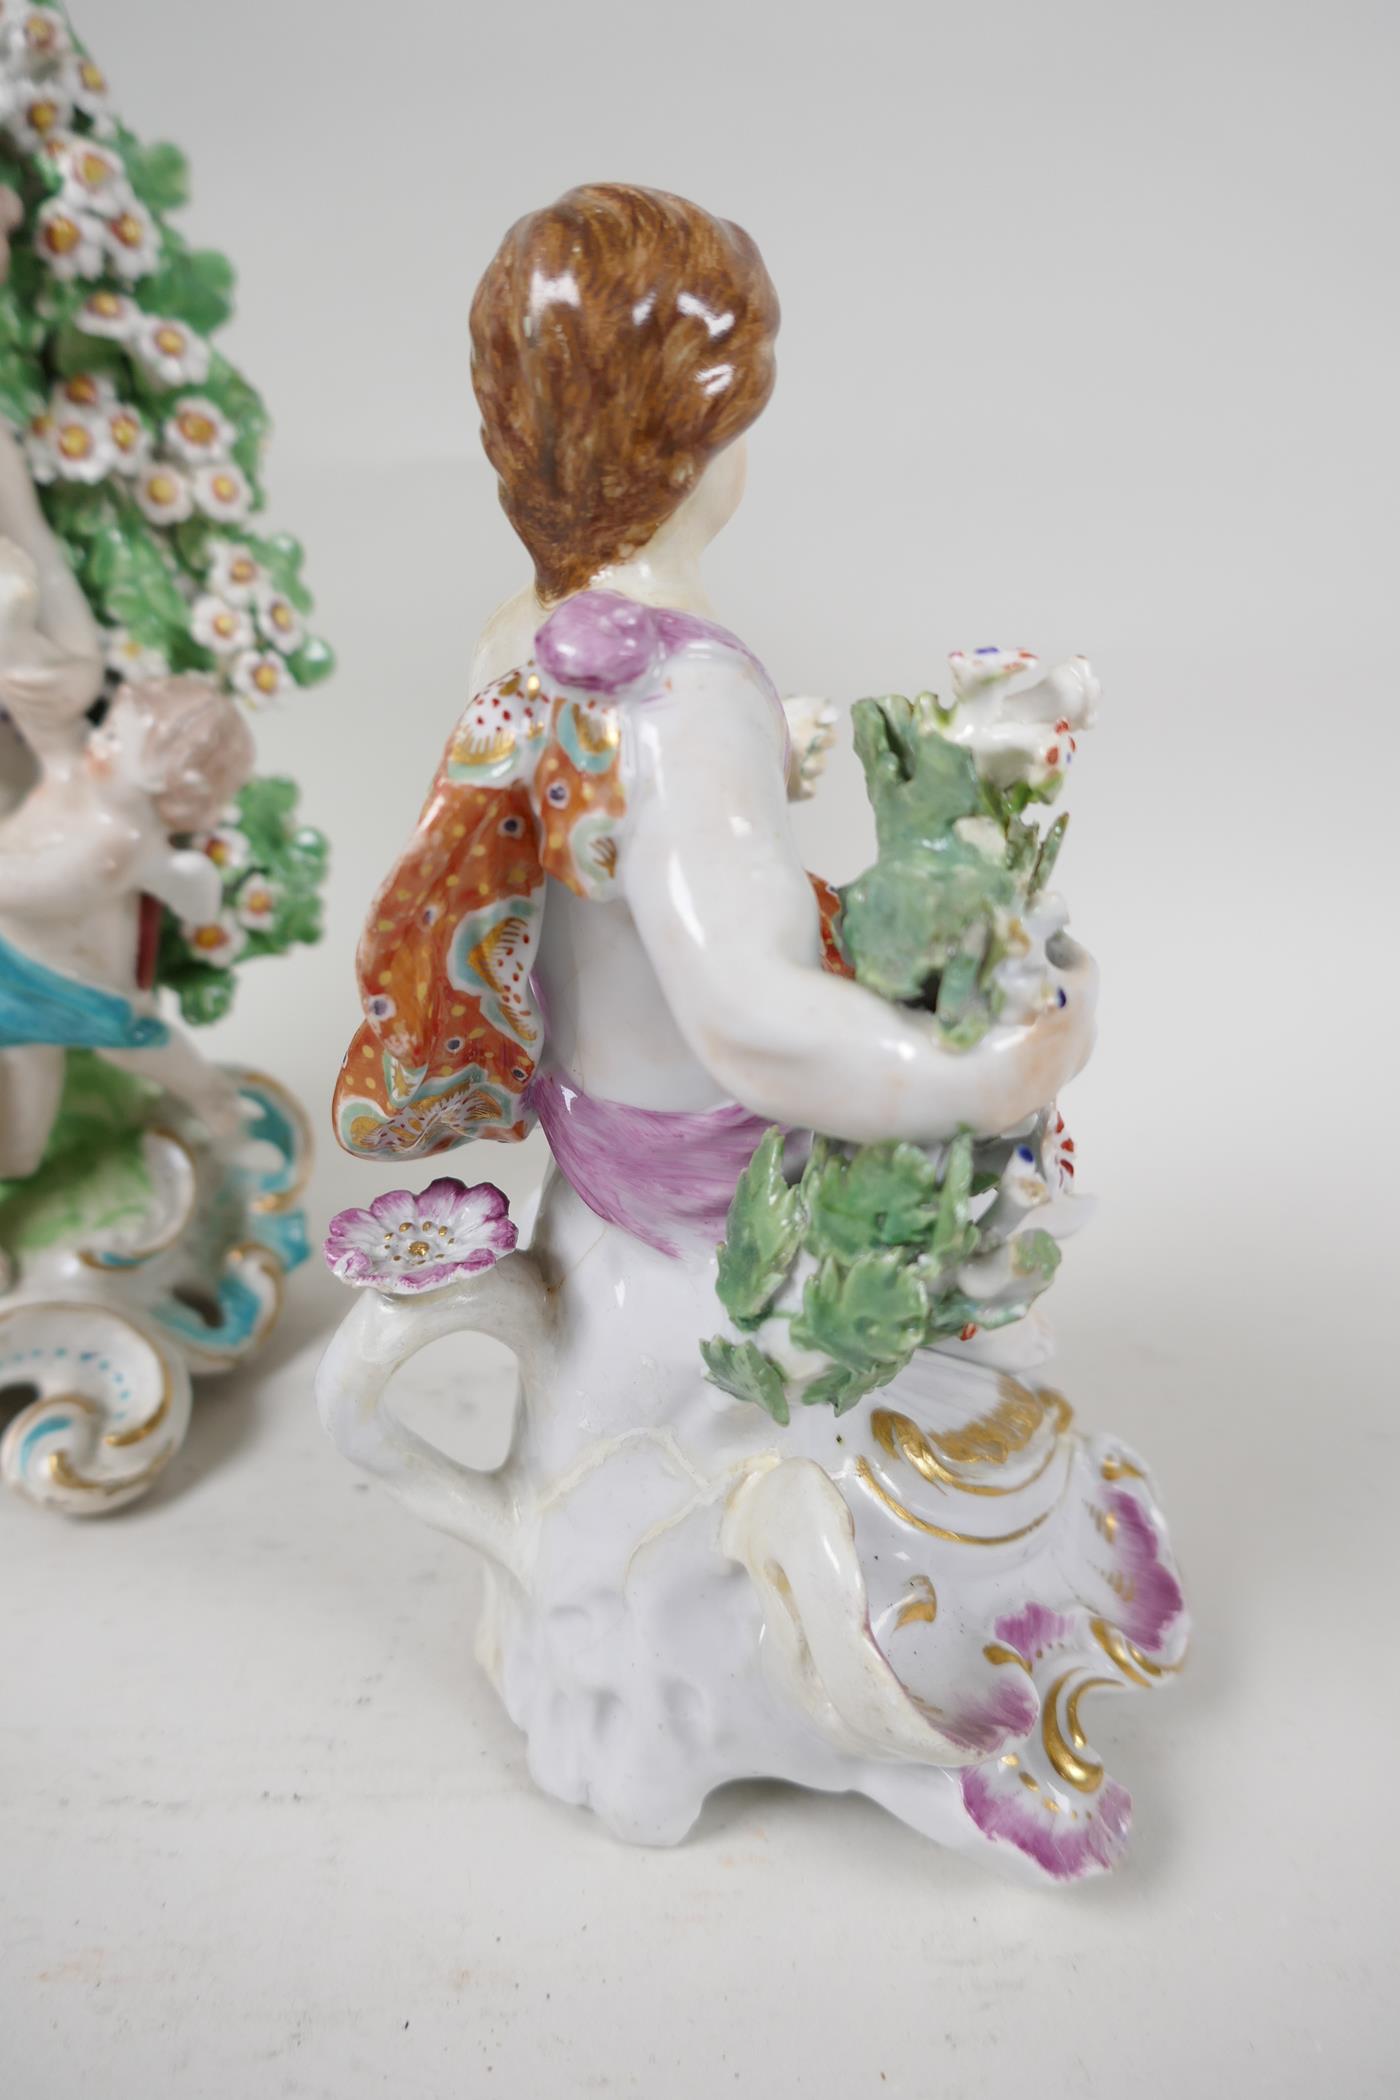 Three early English porcelain figures, a brocage figure of a woman and child (Chelsea) 8" high, a - Image 5 of 7